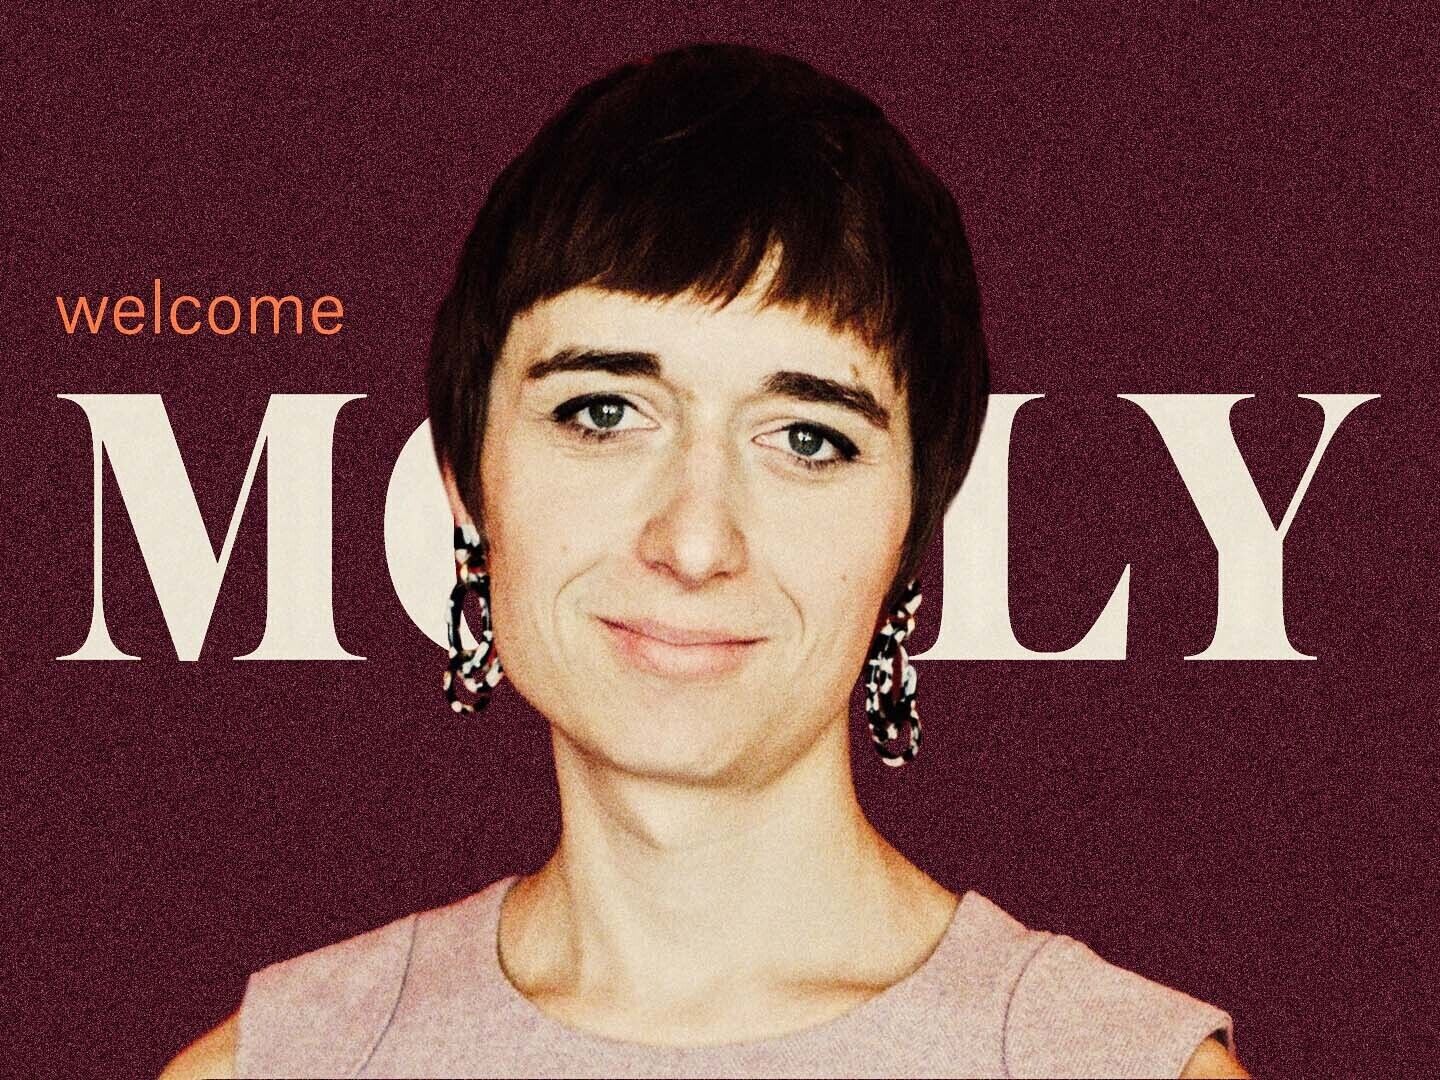 Molly joins team